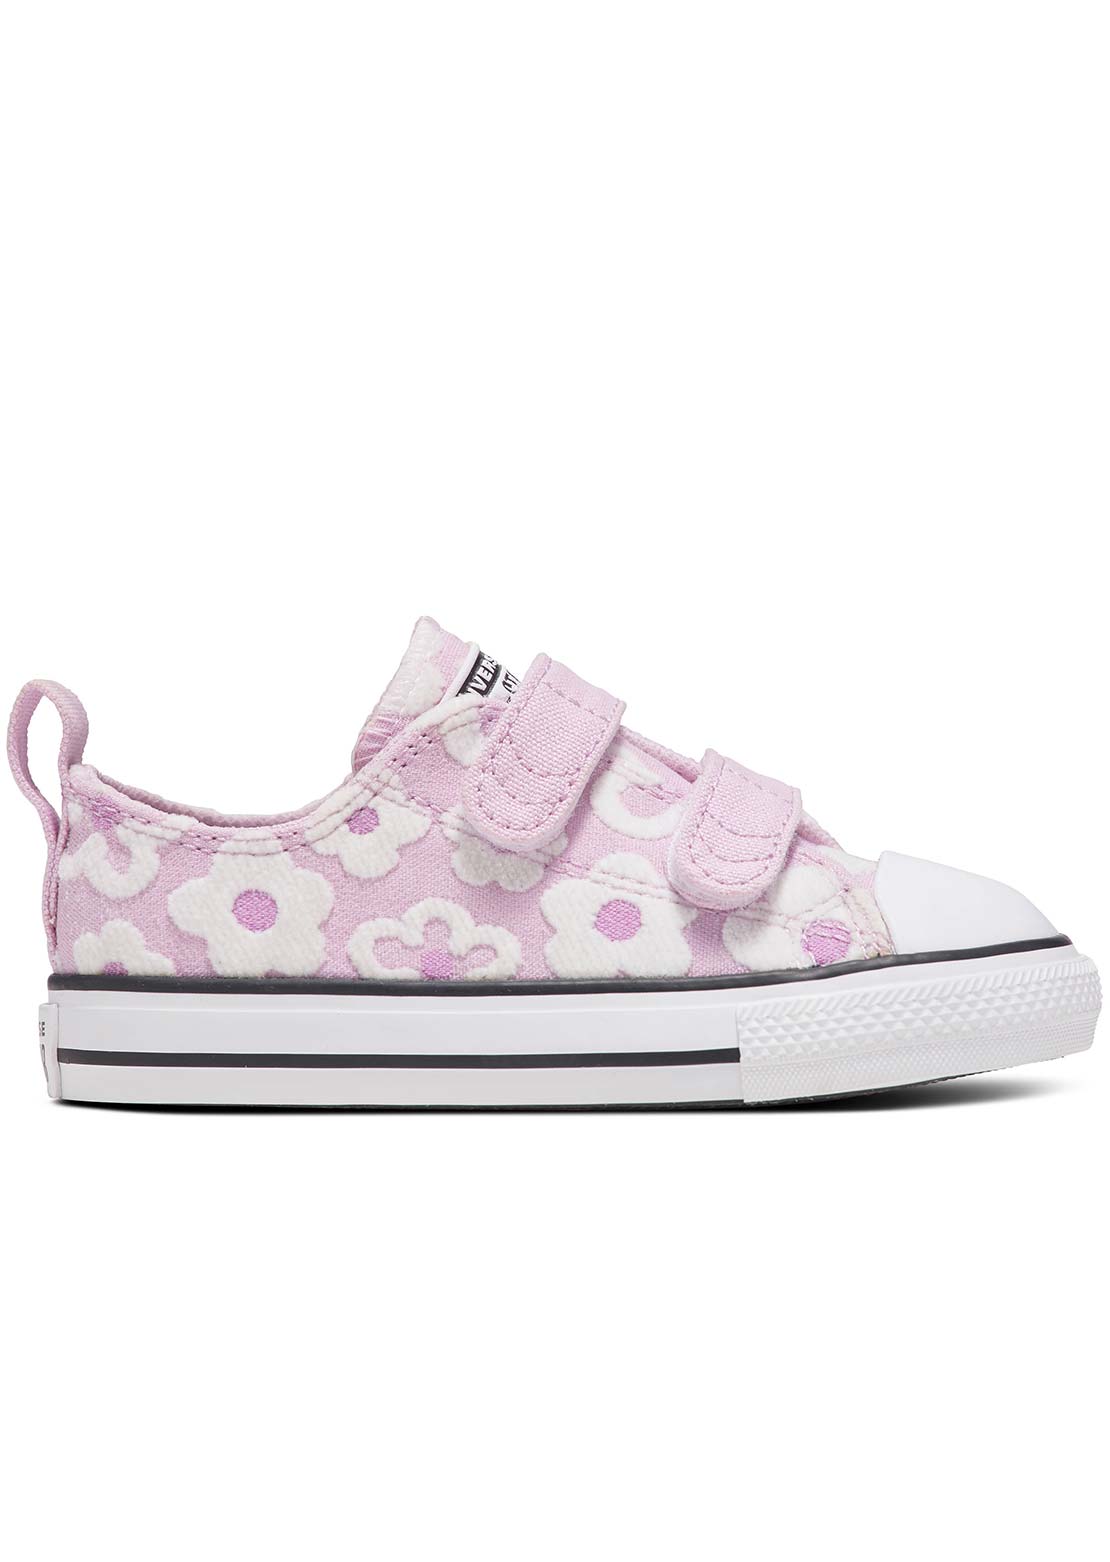 Converse Infant Chuck Taylor All Star 2V Shoes Stardust Lilac/White/Black